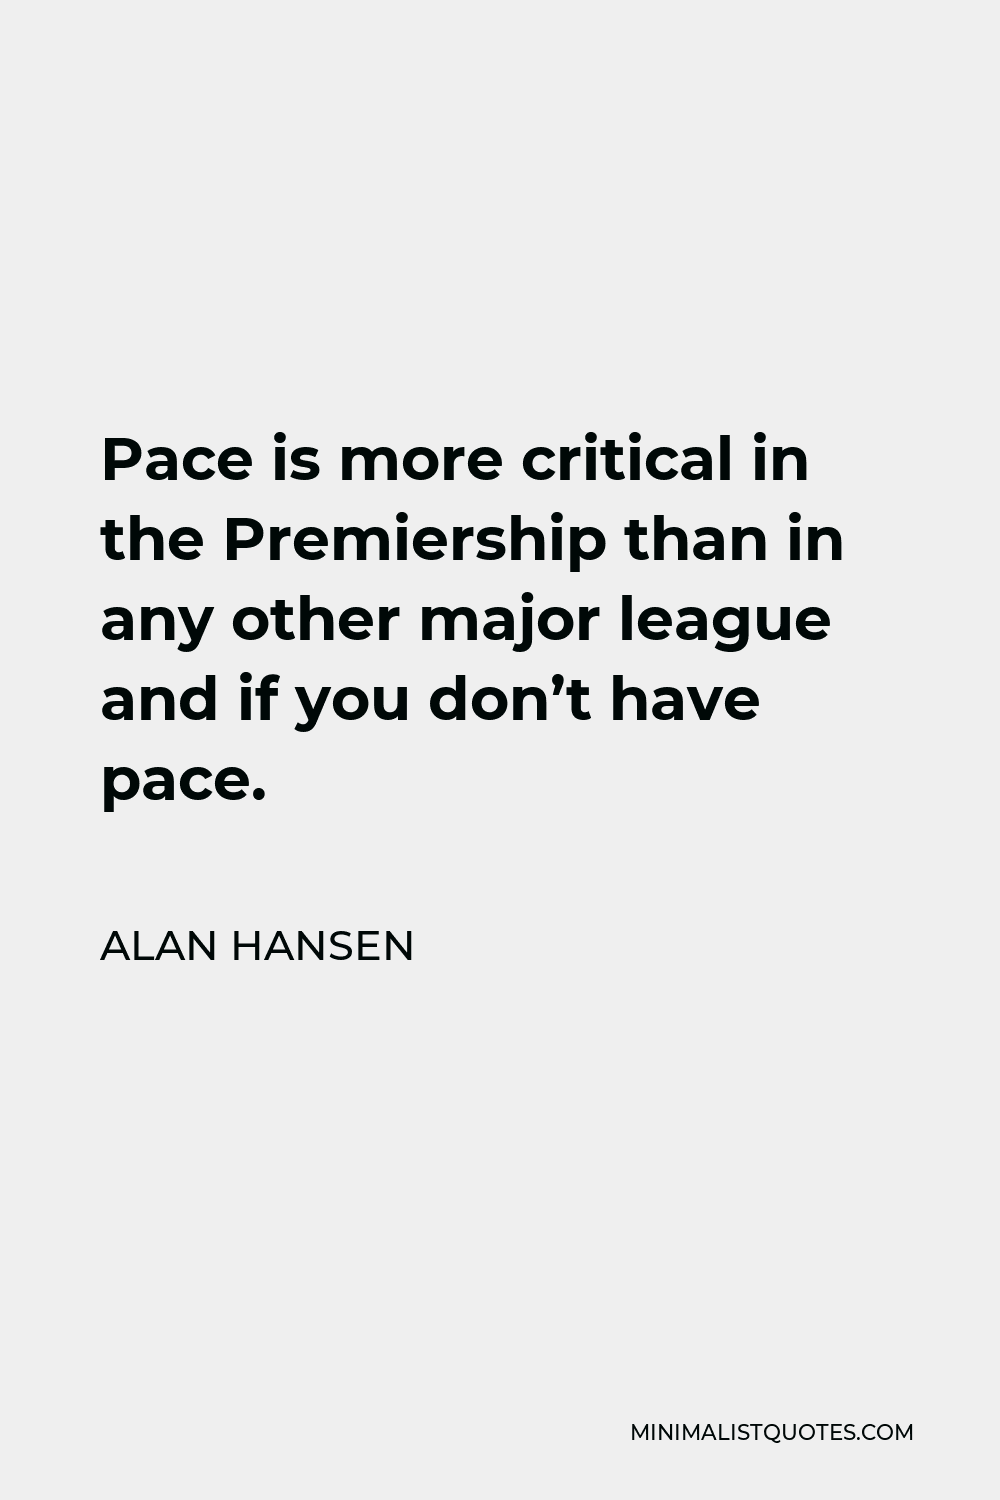 Alan Hansen Quote - Pace is more critical in the Premiership than in any other major league and if you don’t have pace.